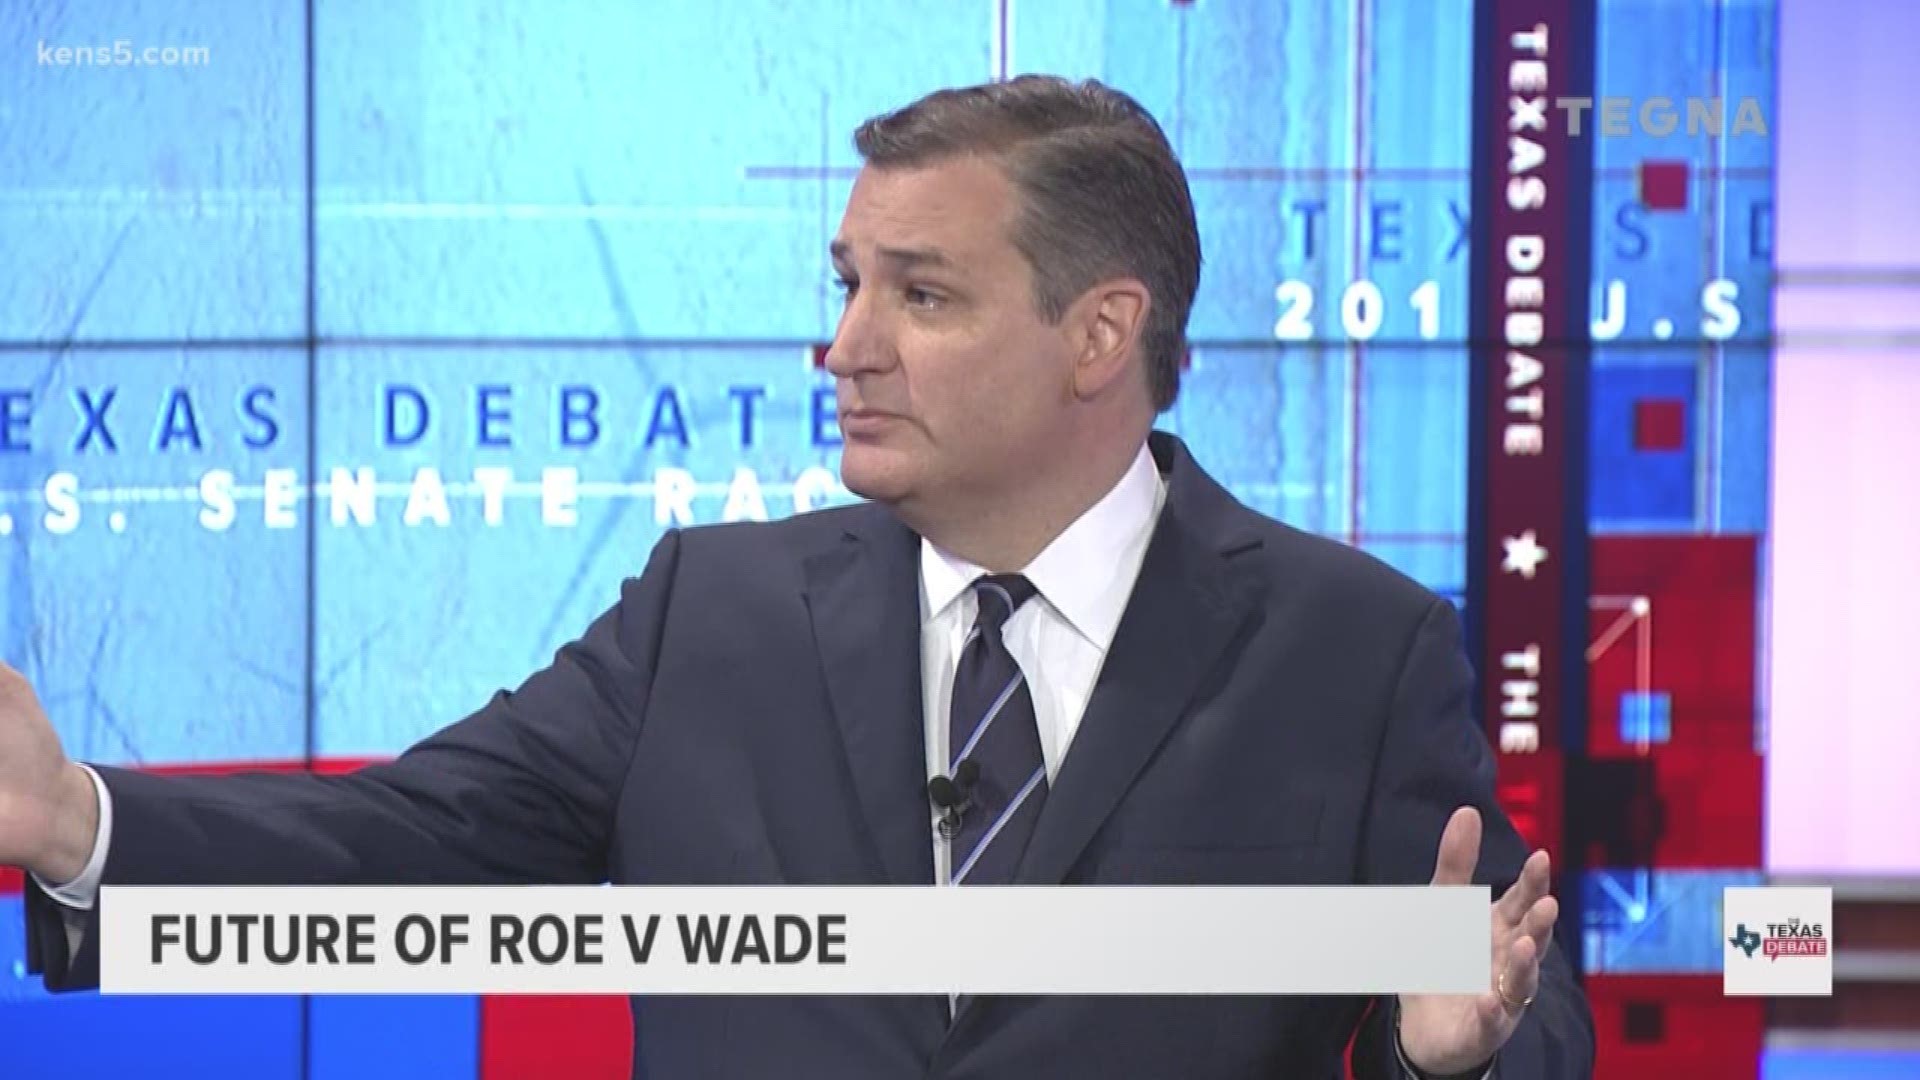 Sen. Ted Cruz says every life is a gift from God and says that he's pro-life while O'Rourke's stance as "extreme pro-abortion" doesn't represent Texas.